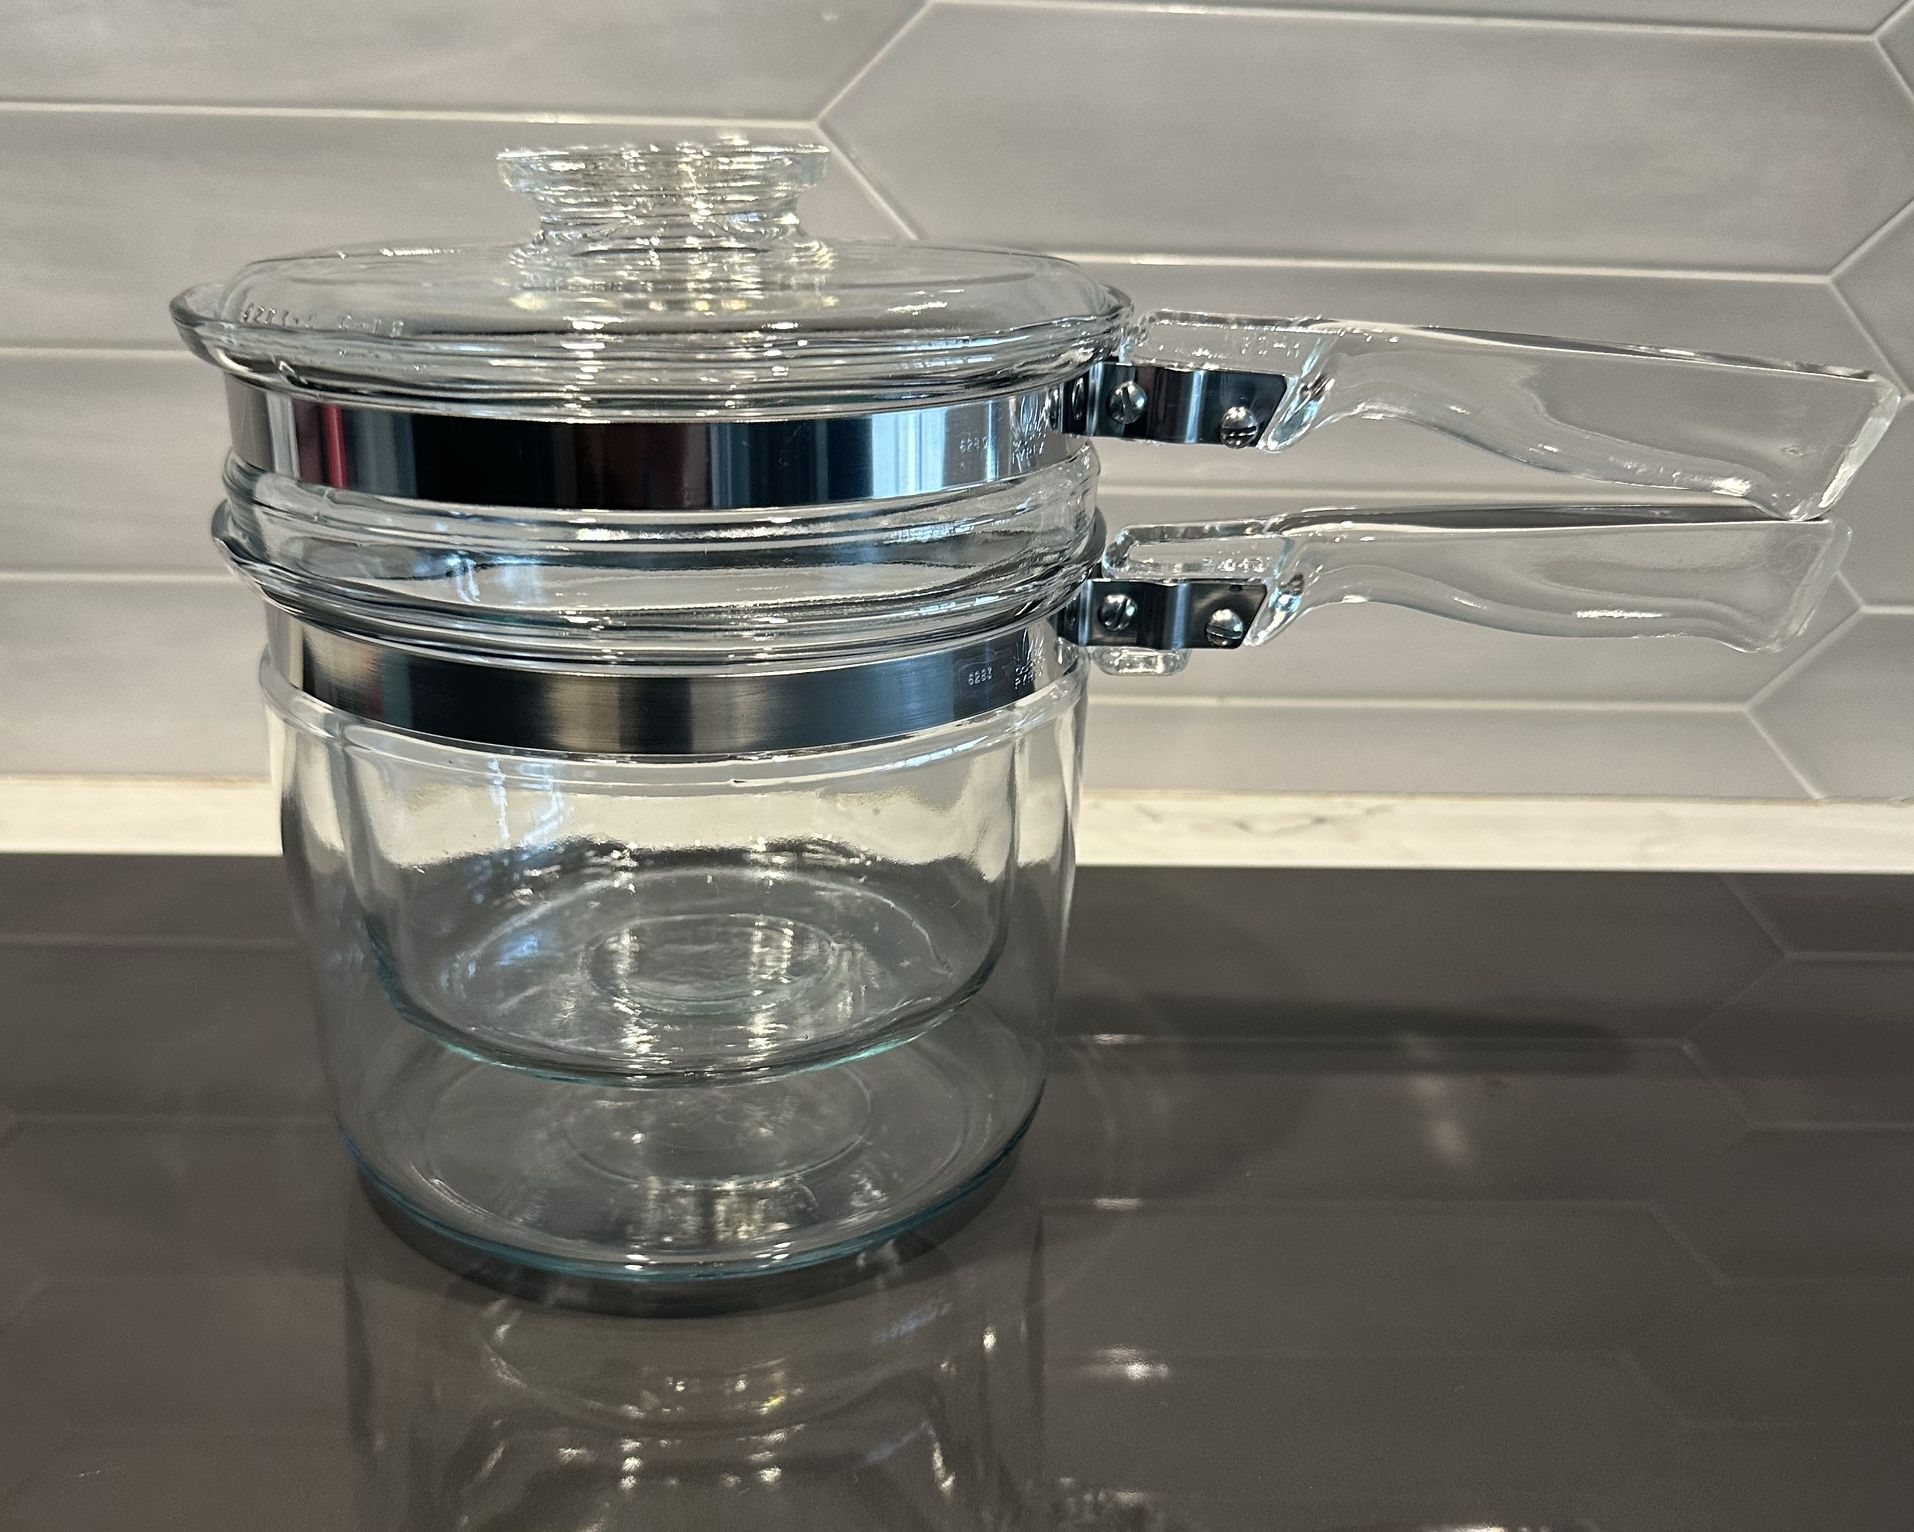 Vintage Pyrex Flameware Glass Double Boiler Pots with lid.   #6283~1.5 QT. In excellent condition. Doesn’t appear to have been used much,  if at all. 